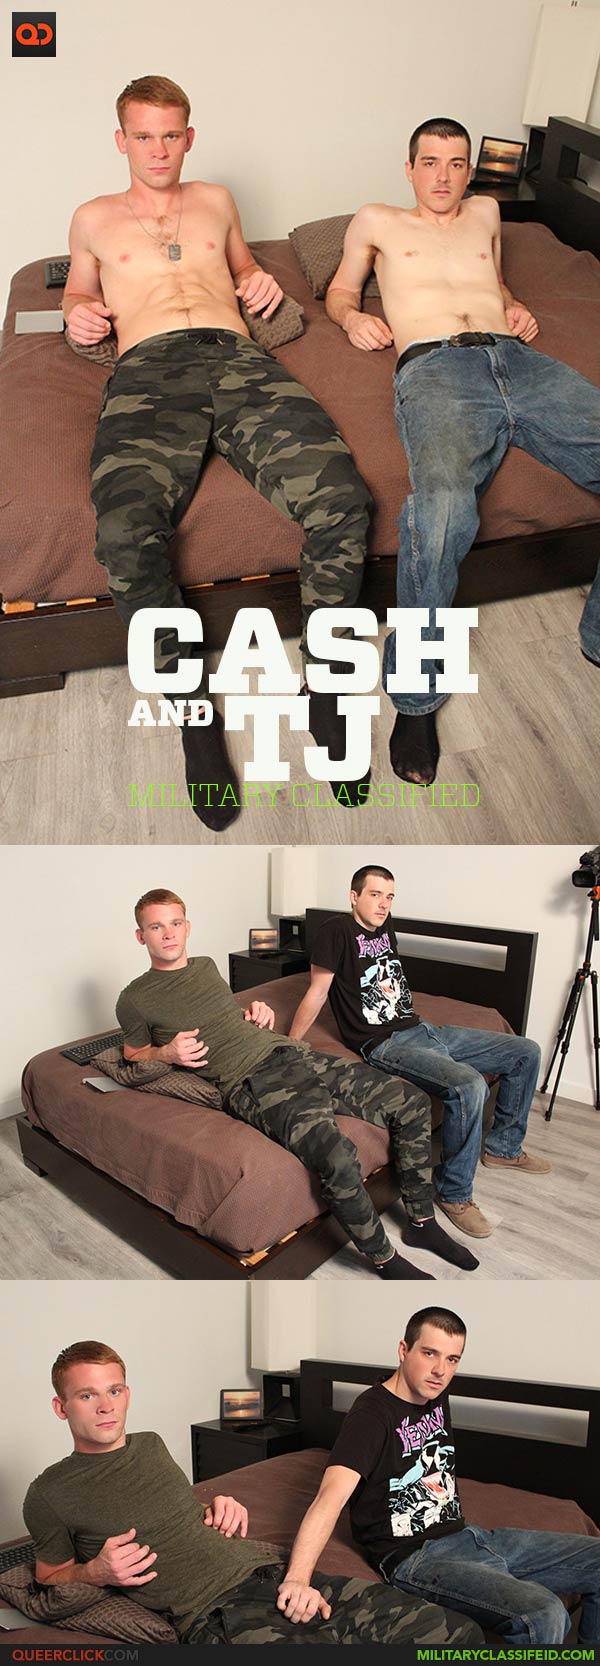 Military Classified: Cash and TJ